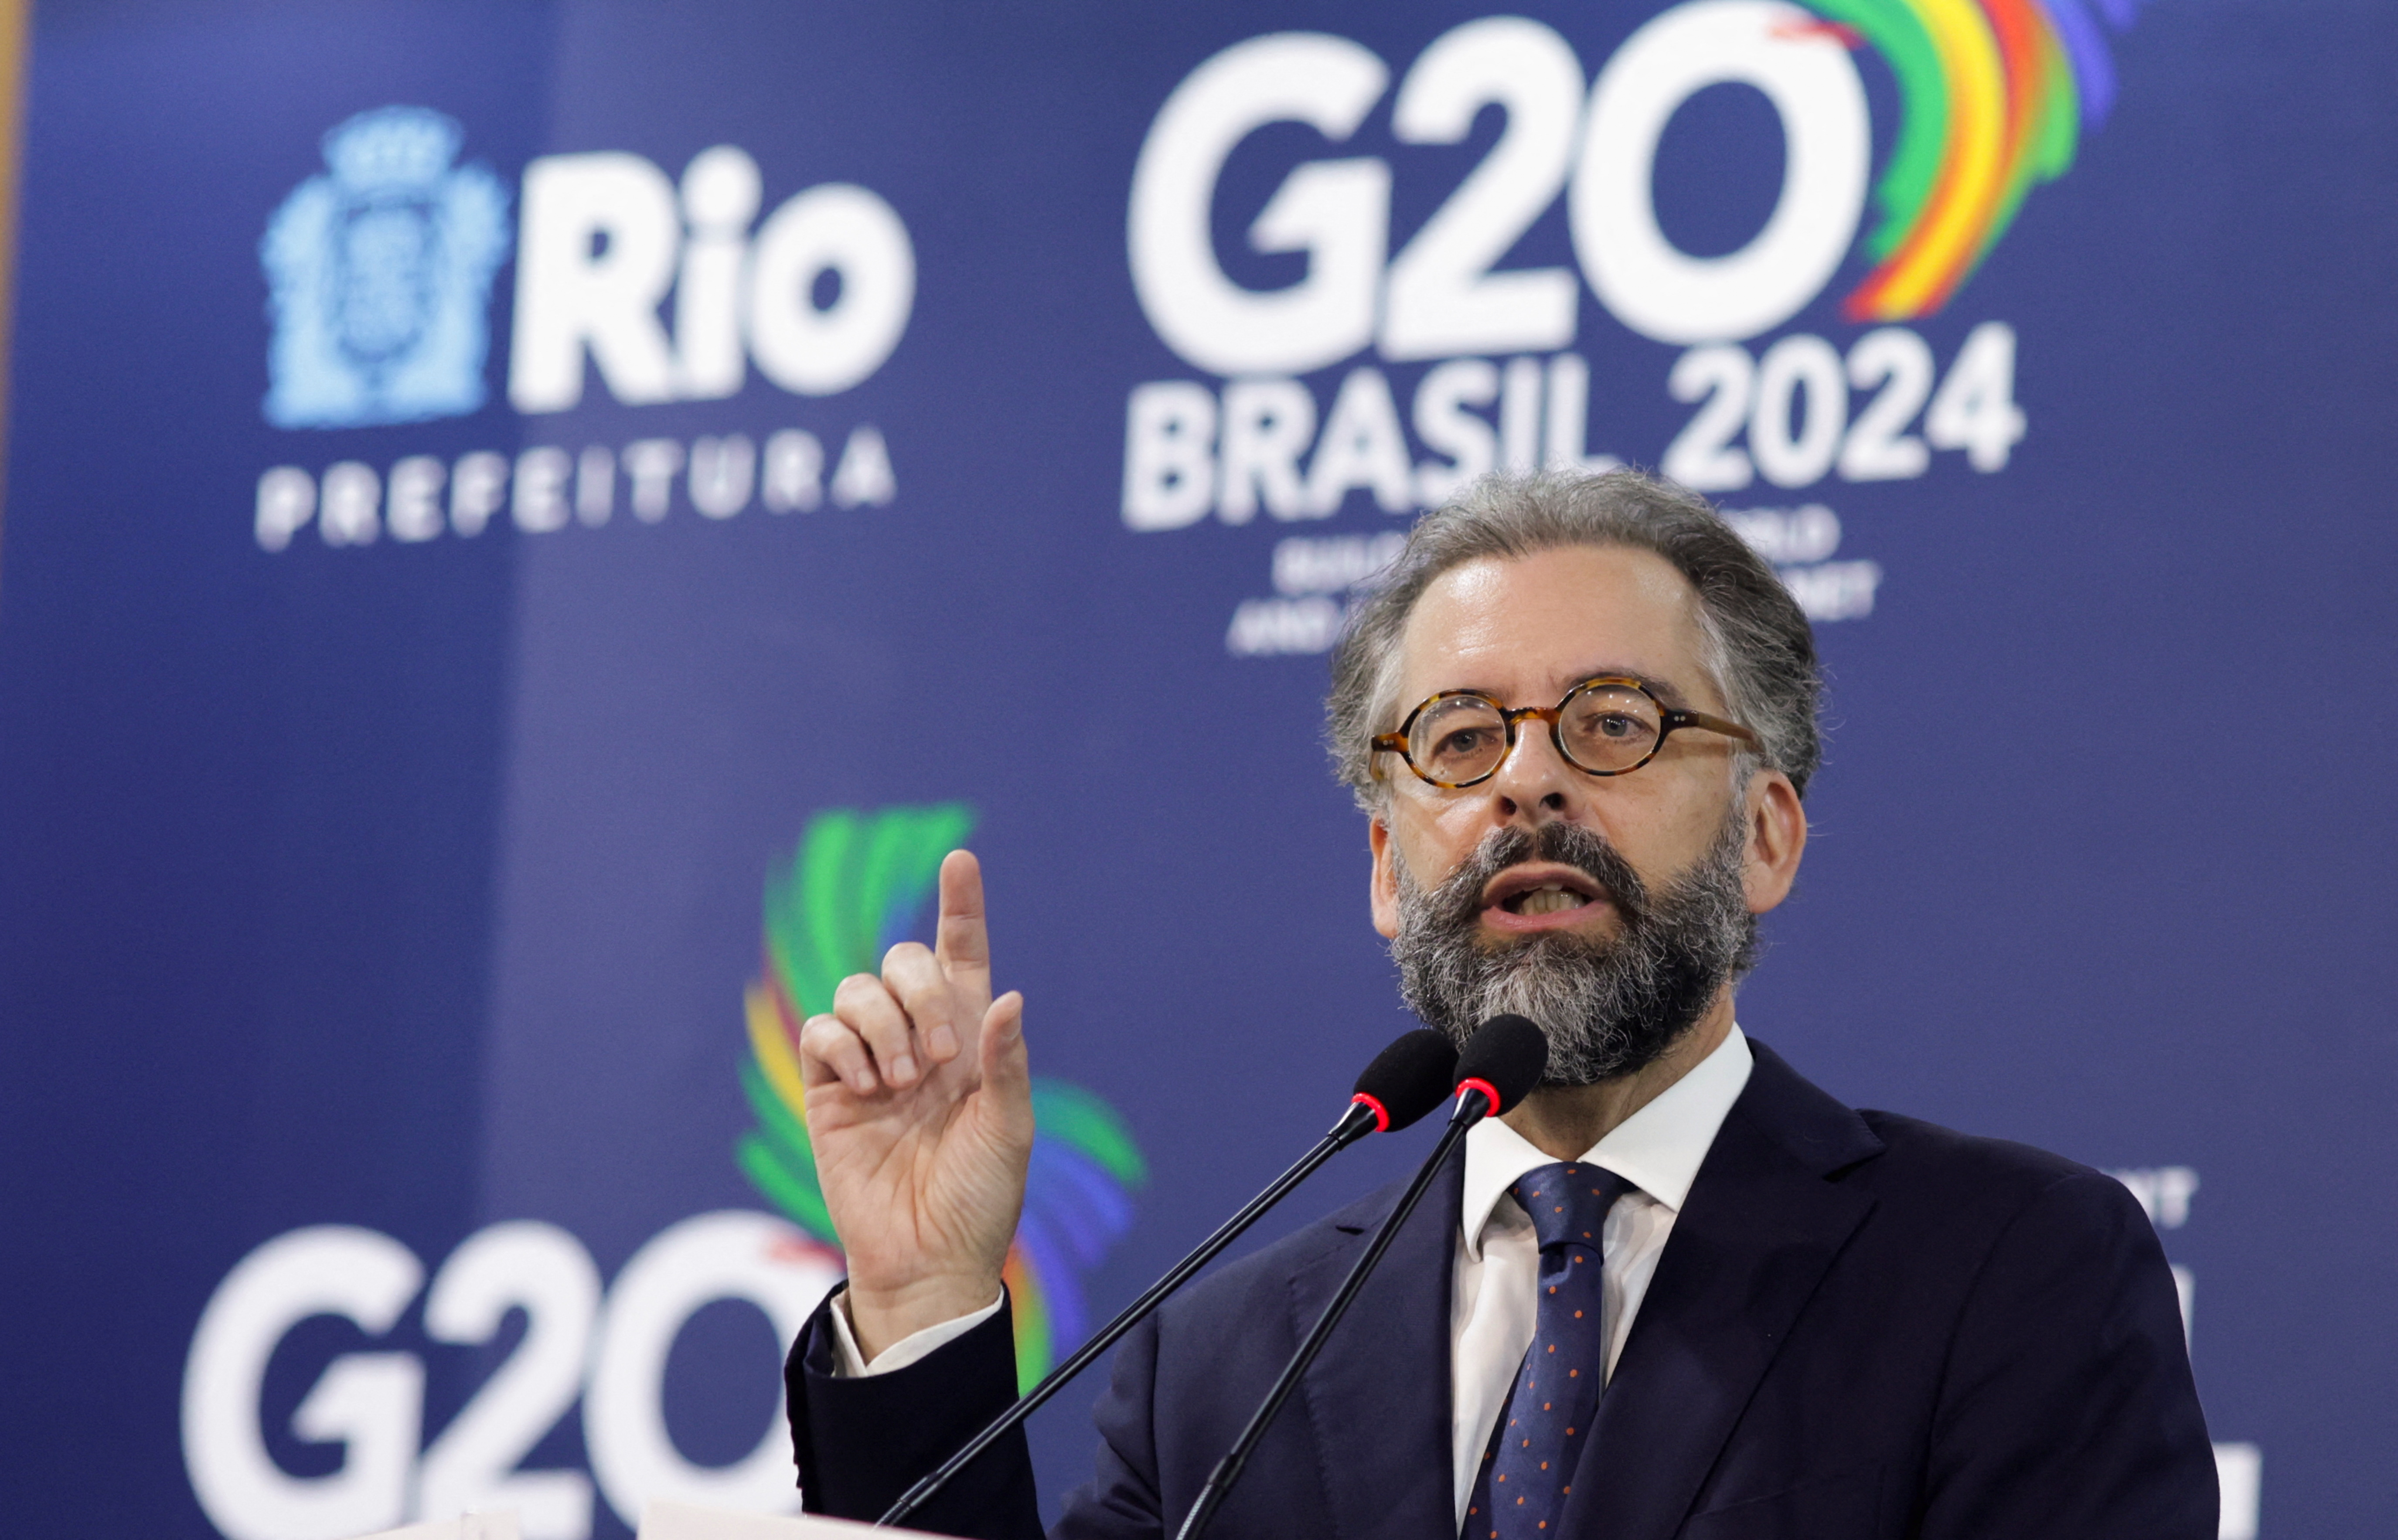 G20 foreign ministers meet in Brazil